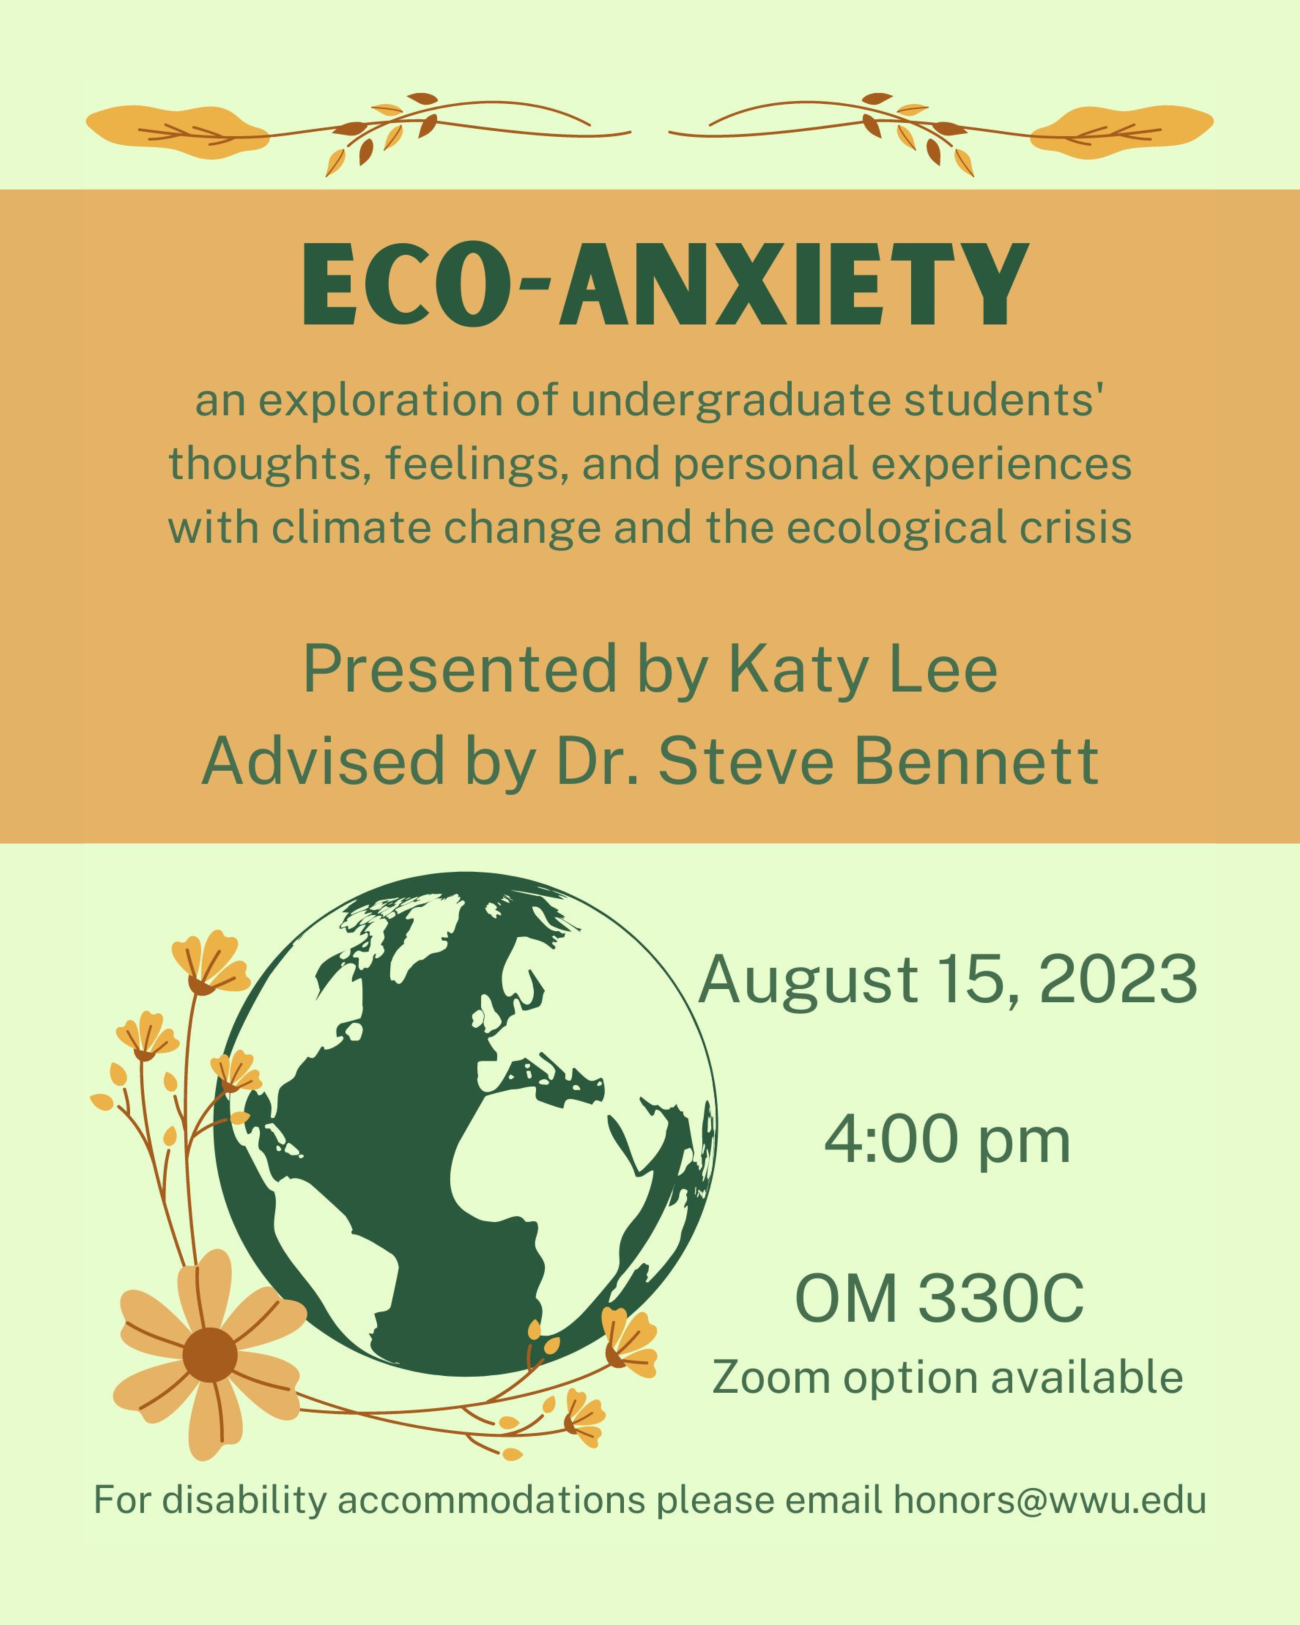 Poster with light green background, orange accents, and a graphic of a dark green globe. Text reads “Eco-Anxiety: an exploration of undergraduate students’ thoughts, feelings, and personal experiences with climate change and the ecological crisis. Presented by Katy Lee, Advised by Dr. Steve Bennet. August 15, 2023. 4:00 pm. OM330C. Zoom option available. For disability accommodations please email honors@wwu.edu”.